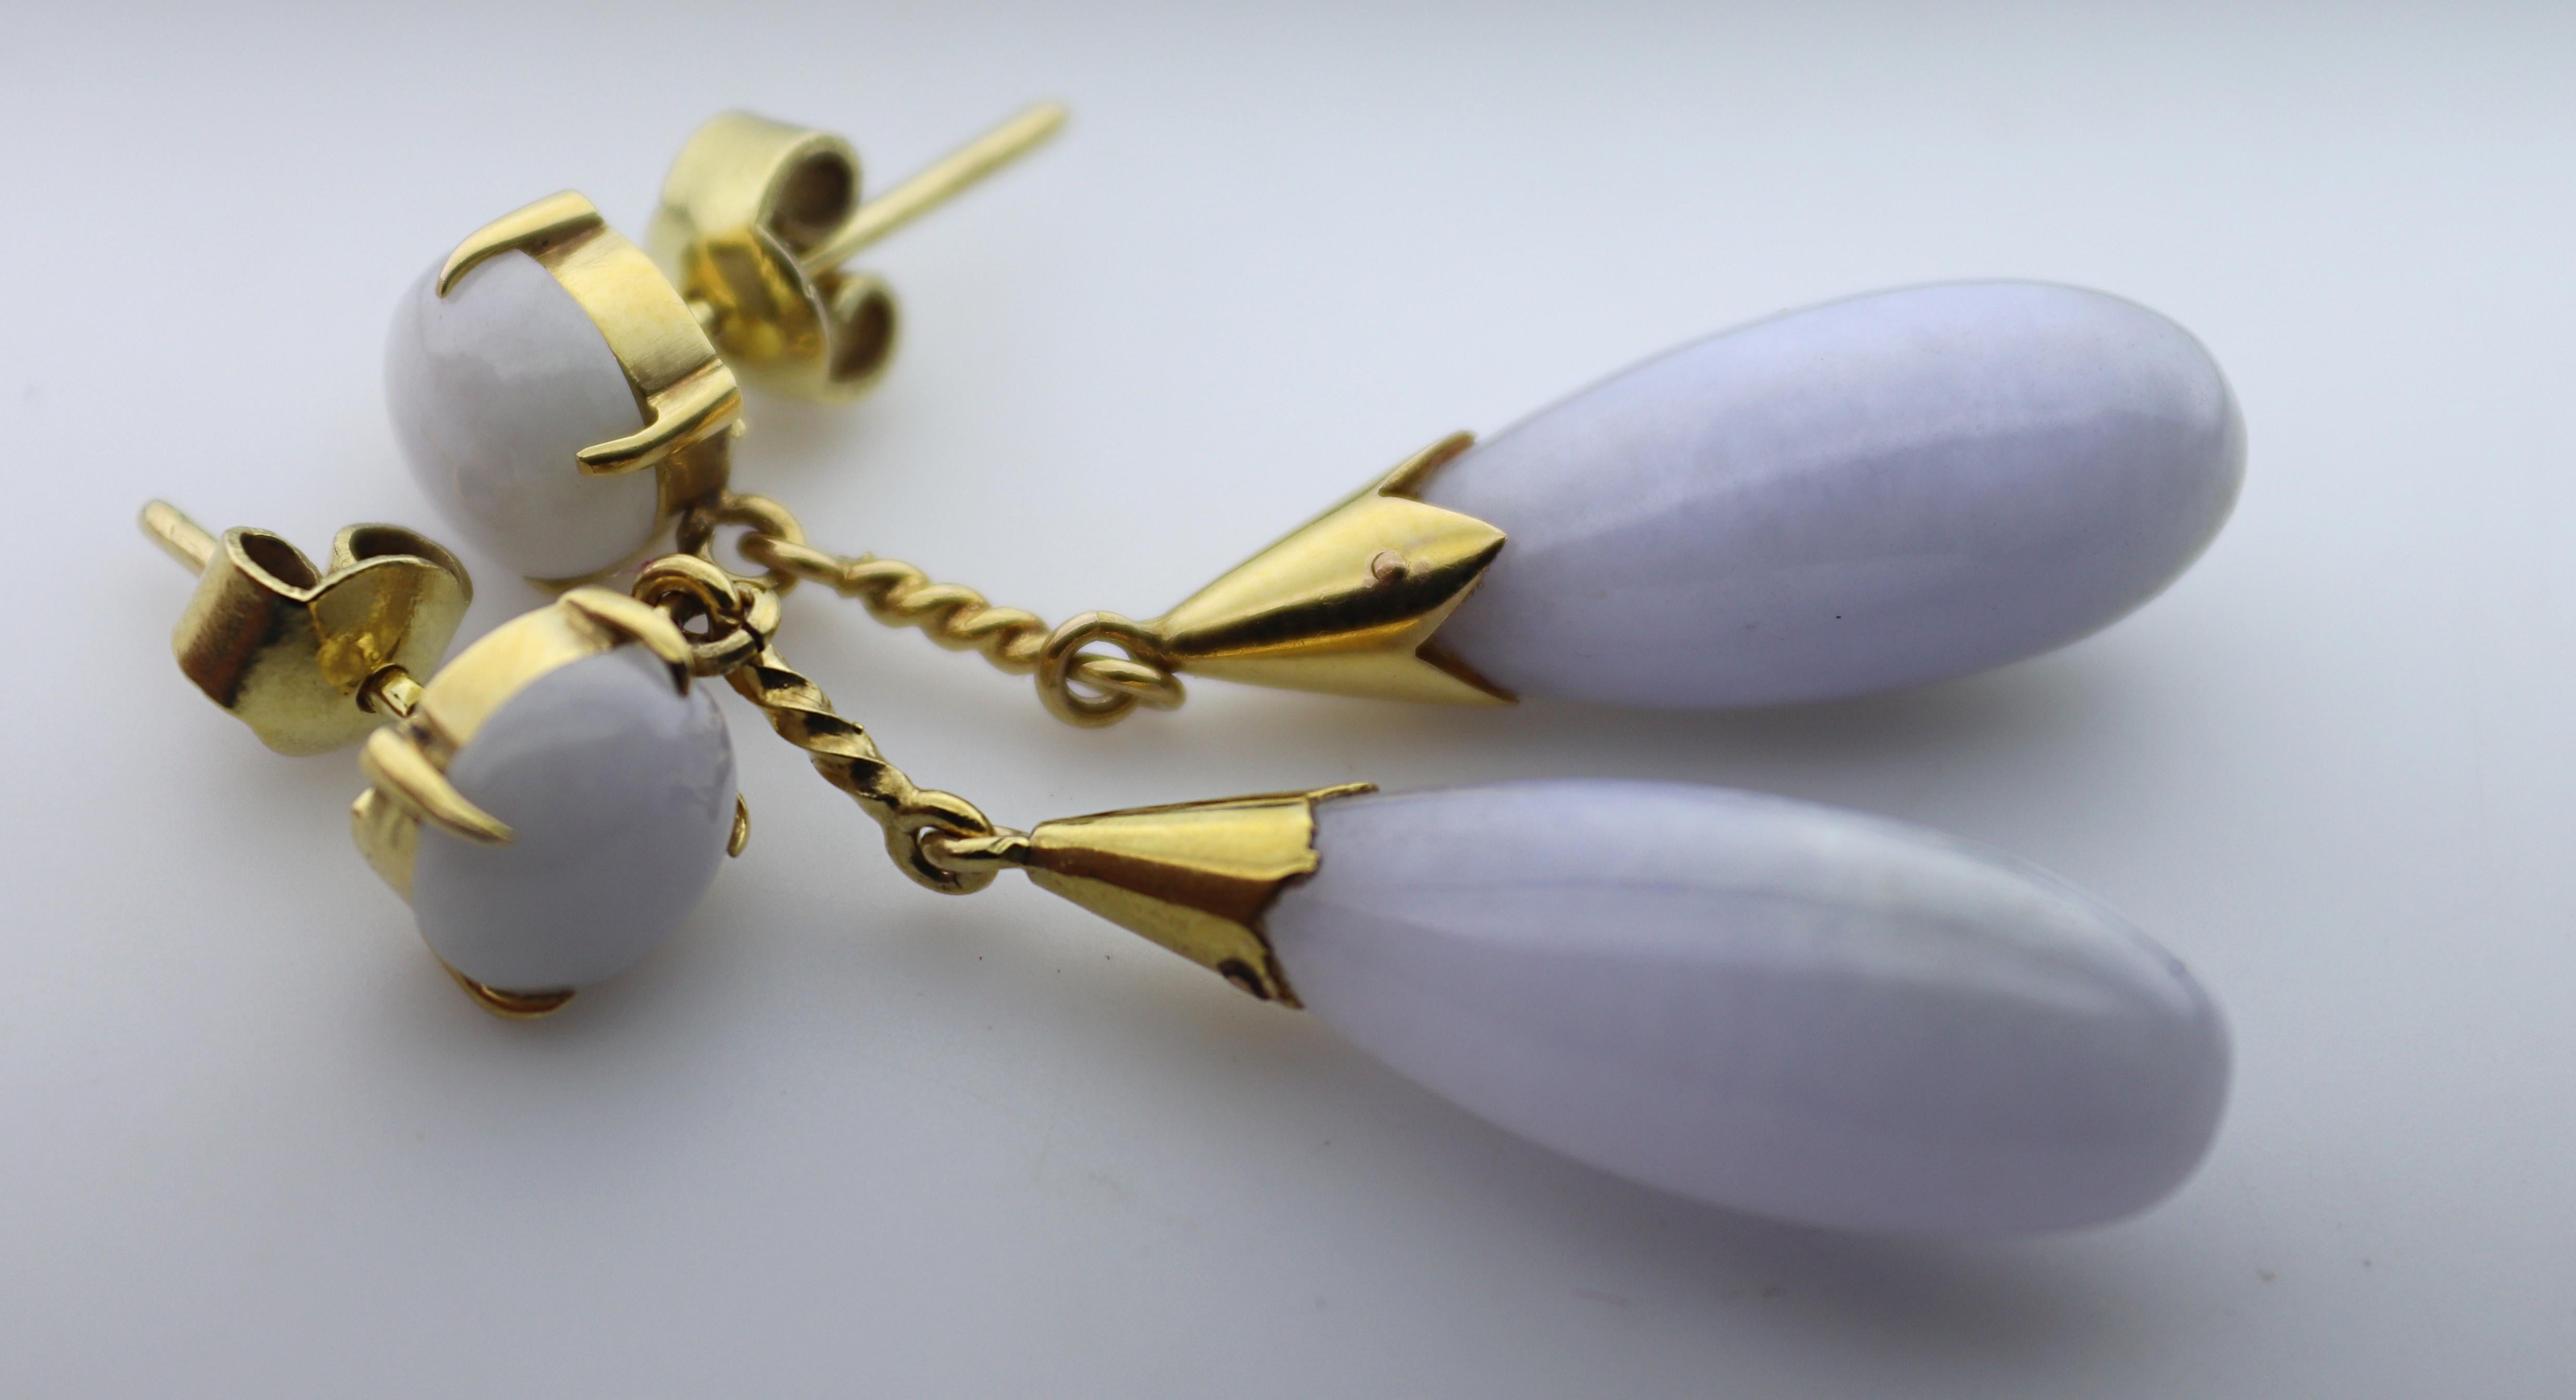 Featuring (2) drop and (2) round Natural lavender Jadeite Jade cabochons,
19 X 8.41 mm, and 7.5 mm, set in a 14k yellow gold articulated drop
mounting, 43.4 mm in length, Gross Weight 8.41 grams.